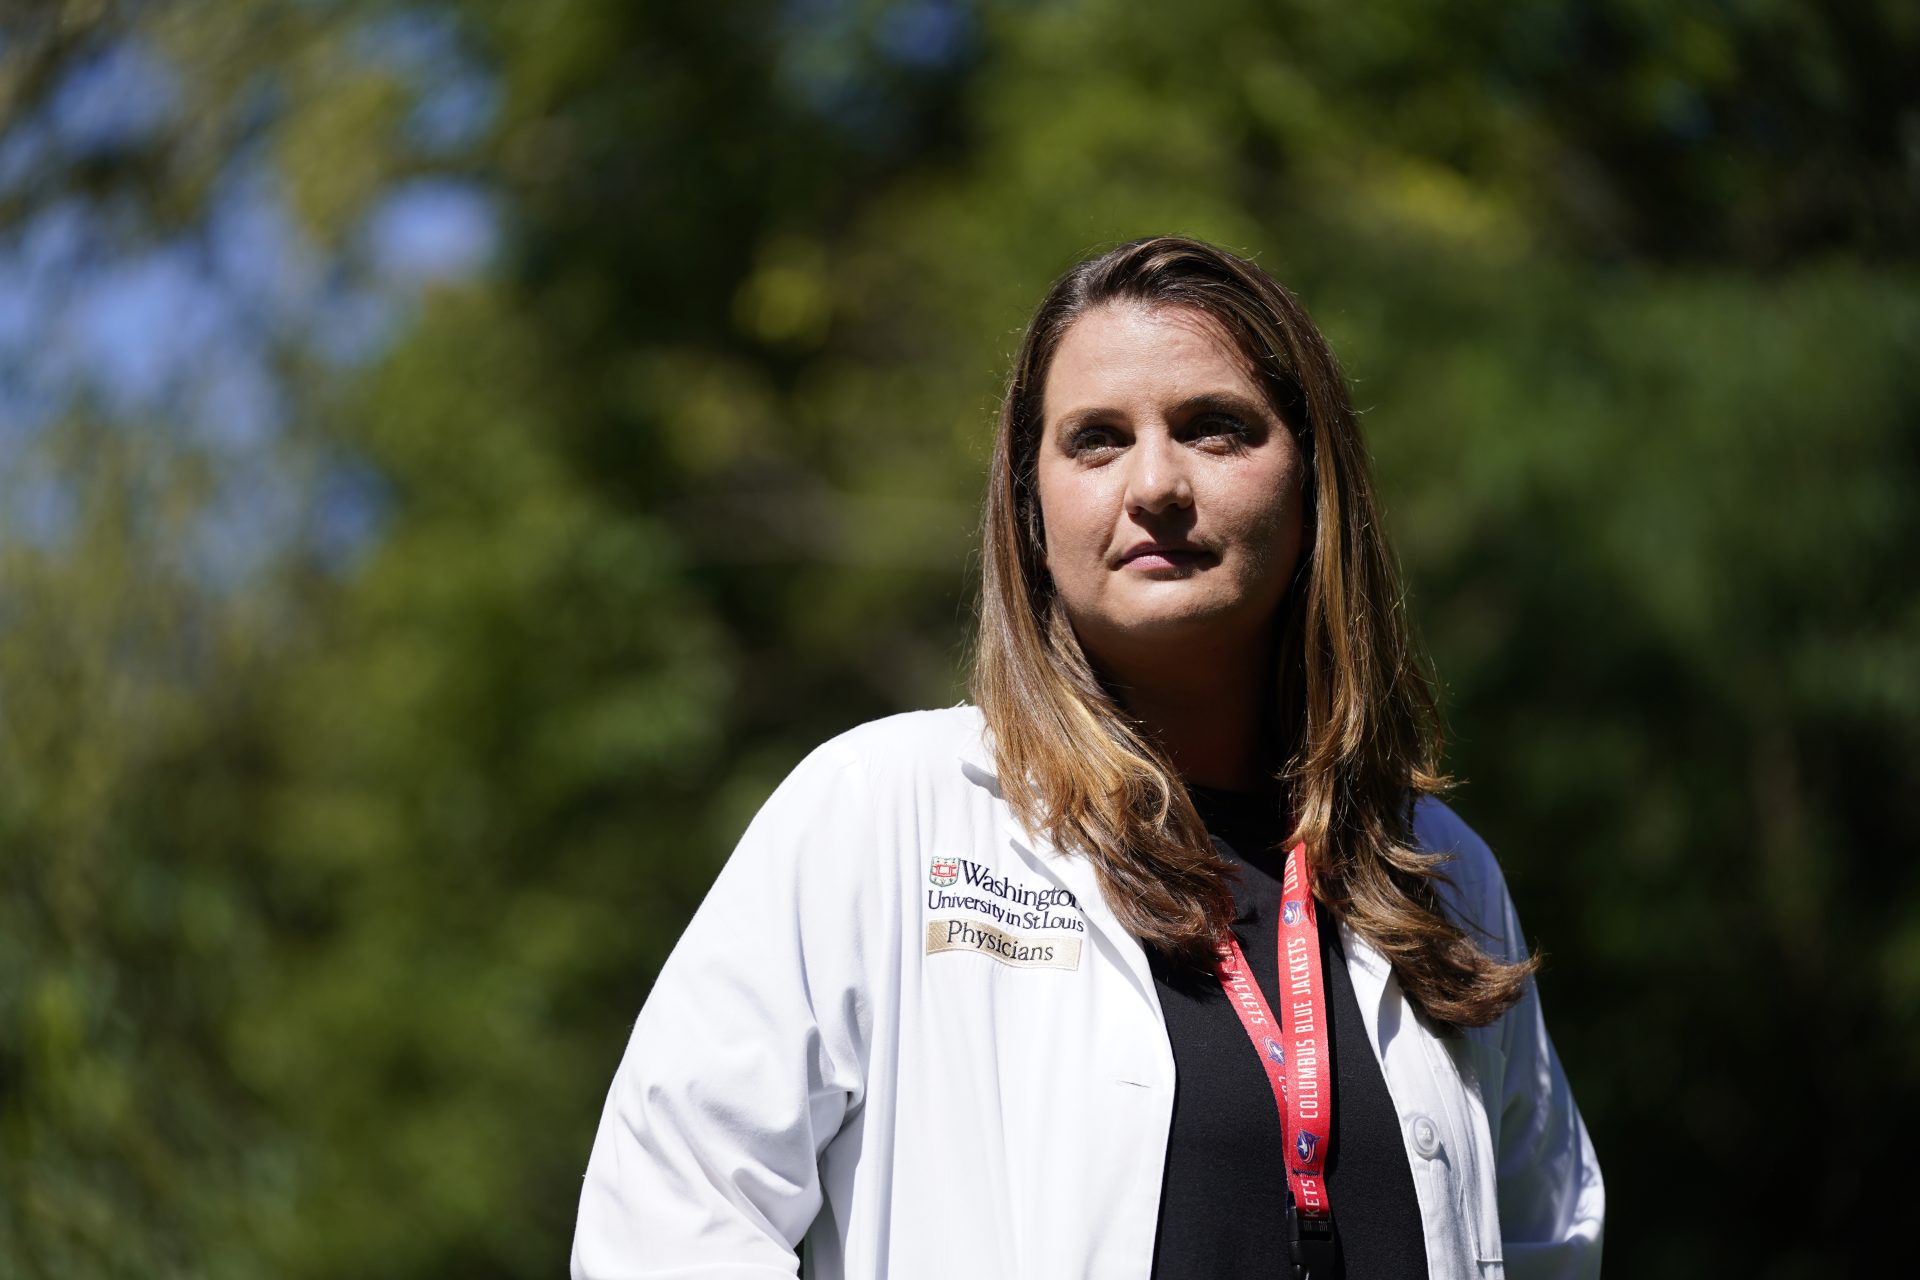 Dr. Lindsay Clukies poses for a portrait outside St. Louis Children's Hospital, where she is an emergency room doctor, Thursday, Sept. 16, 2021, in St. Louis.